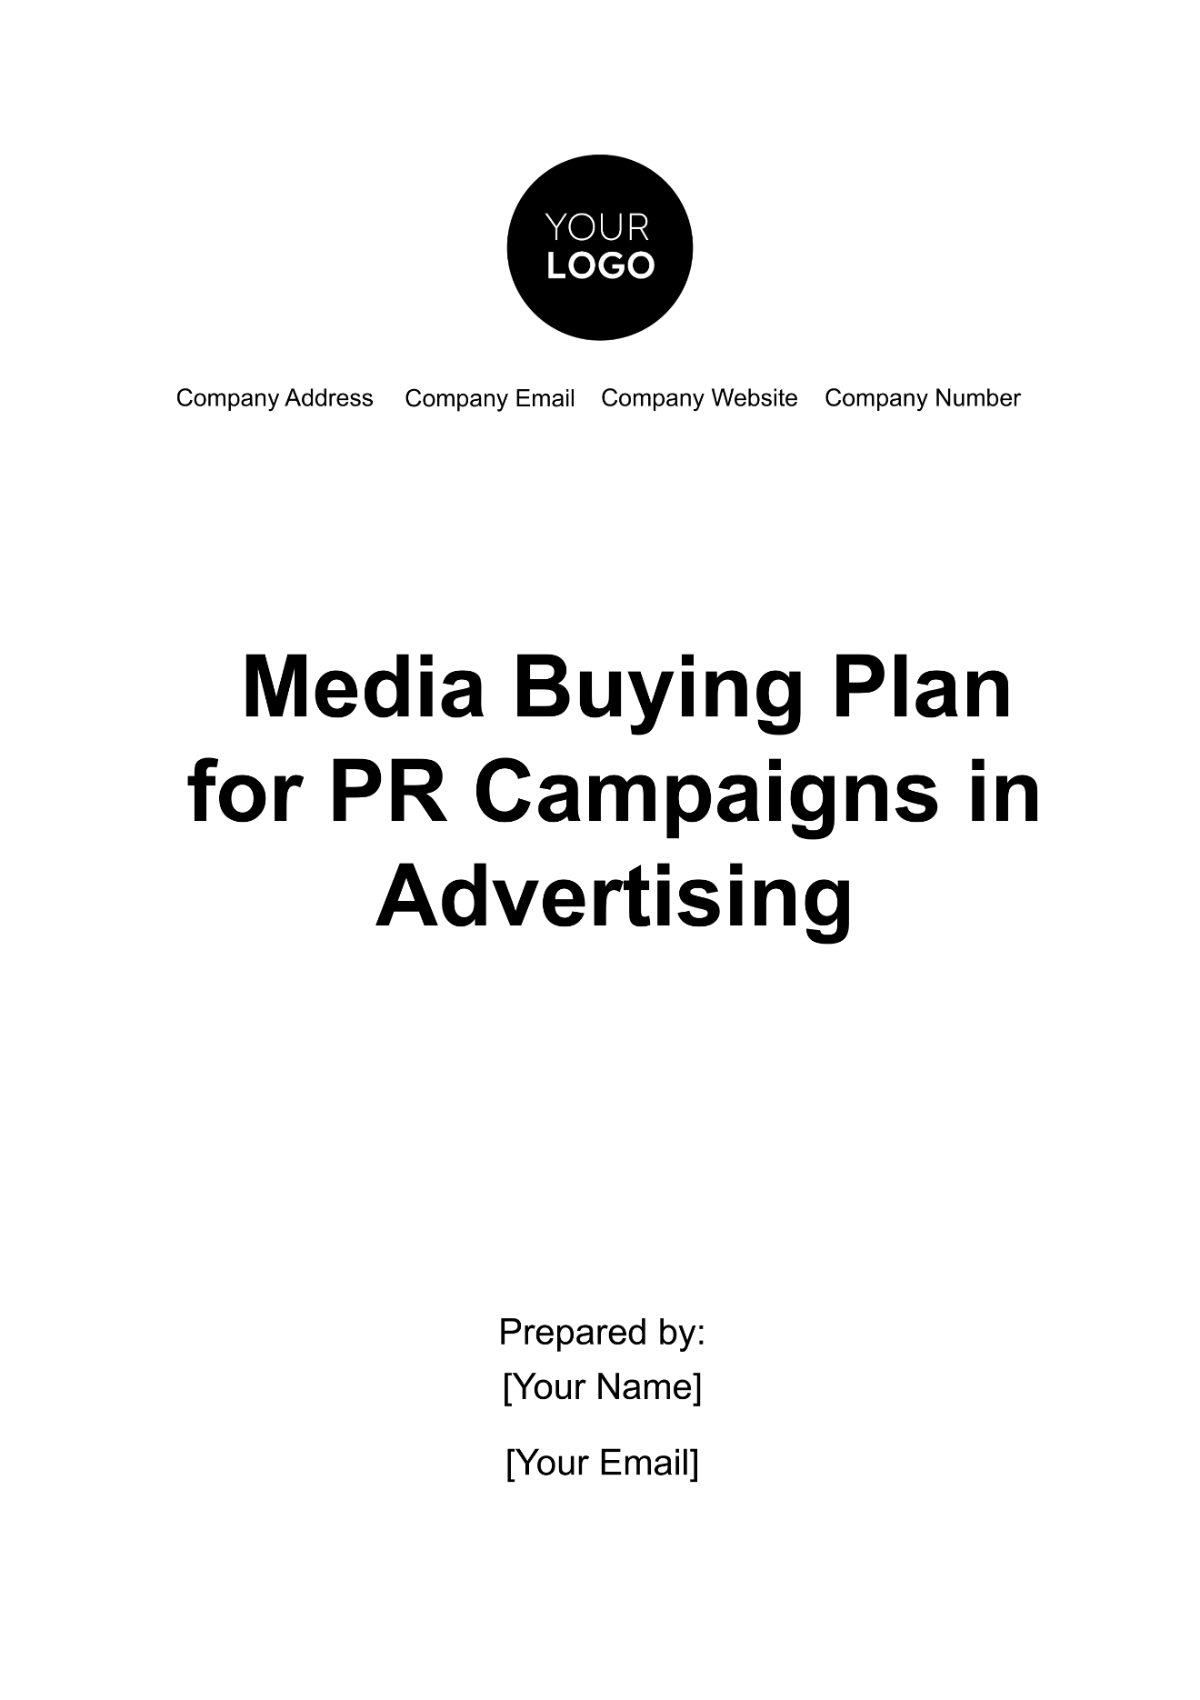 Free Media Buying Plan for PR Campaigns in Advertising Template